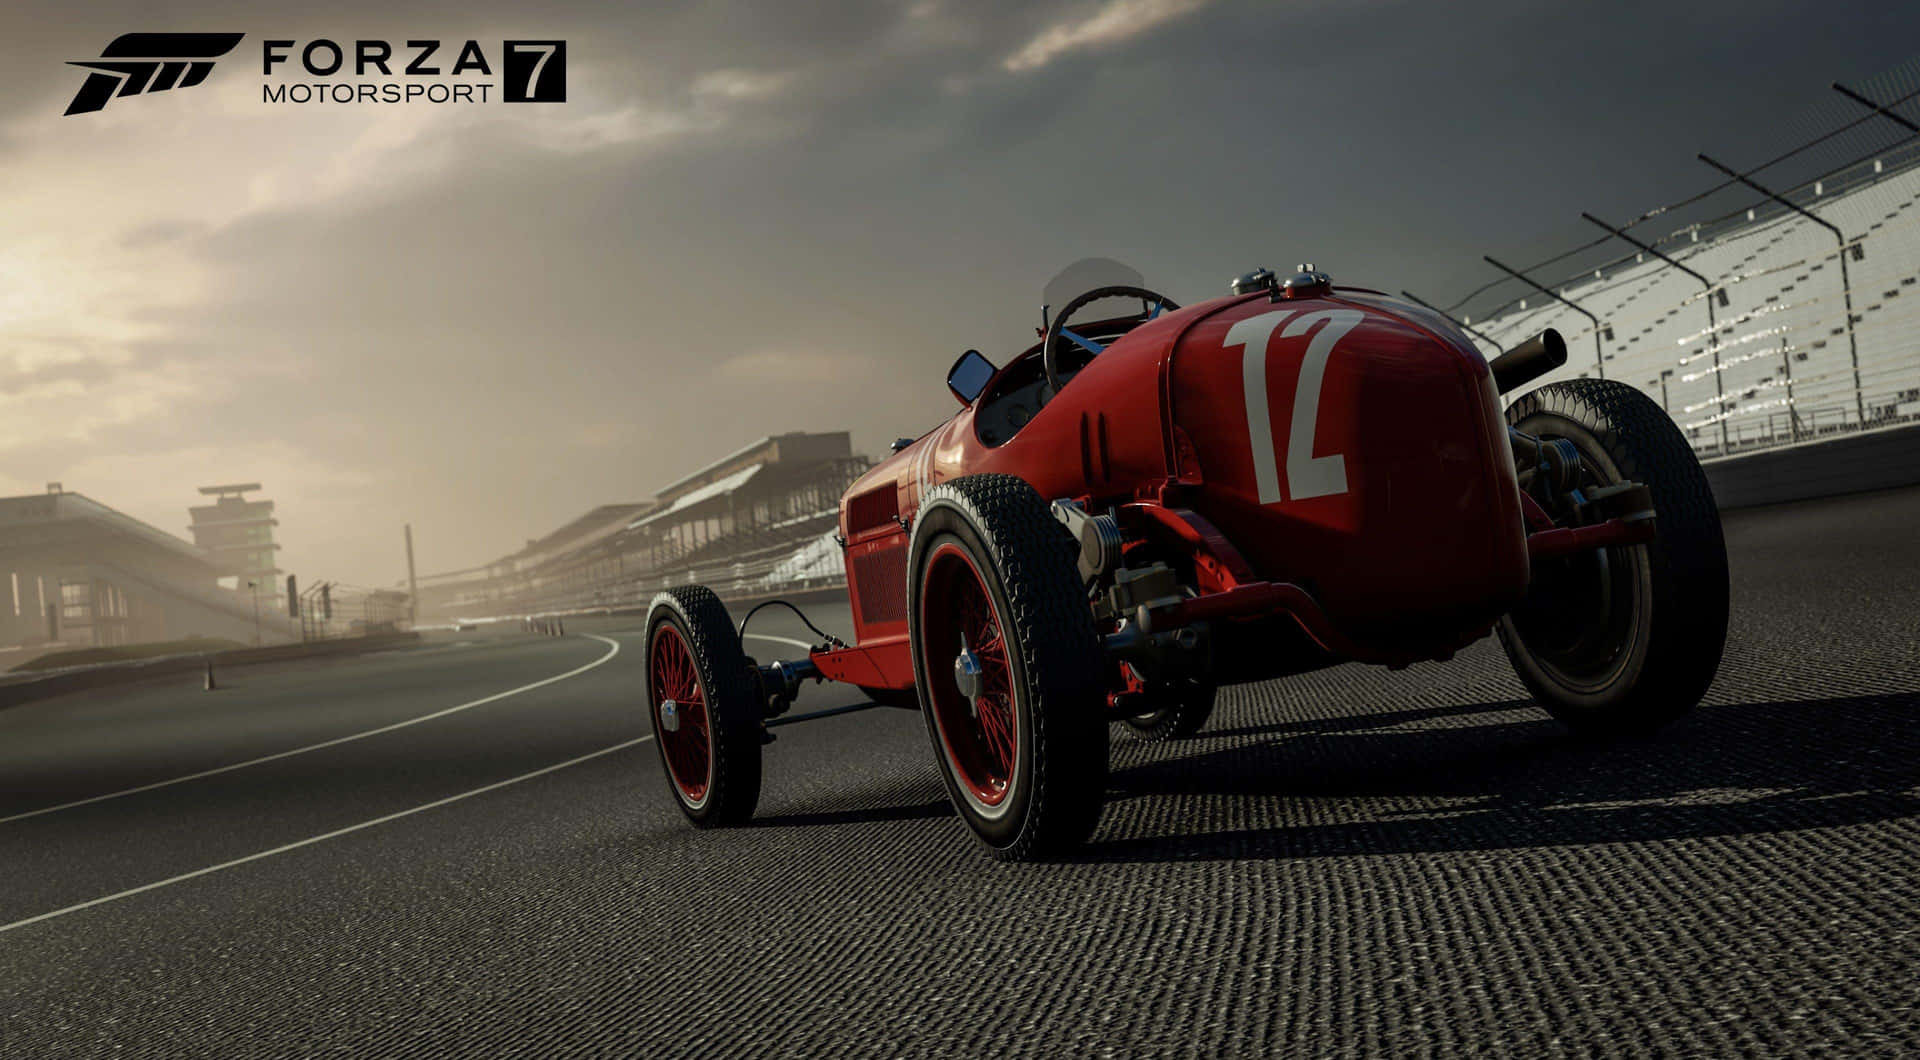 "Forza Motorsport 7 - the ultimate racing experience"